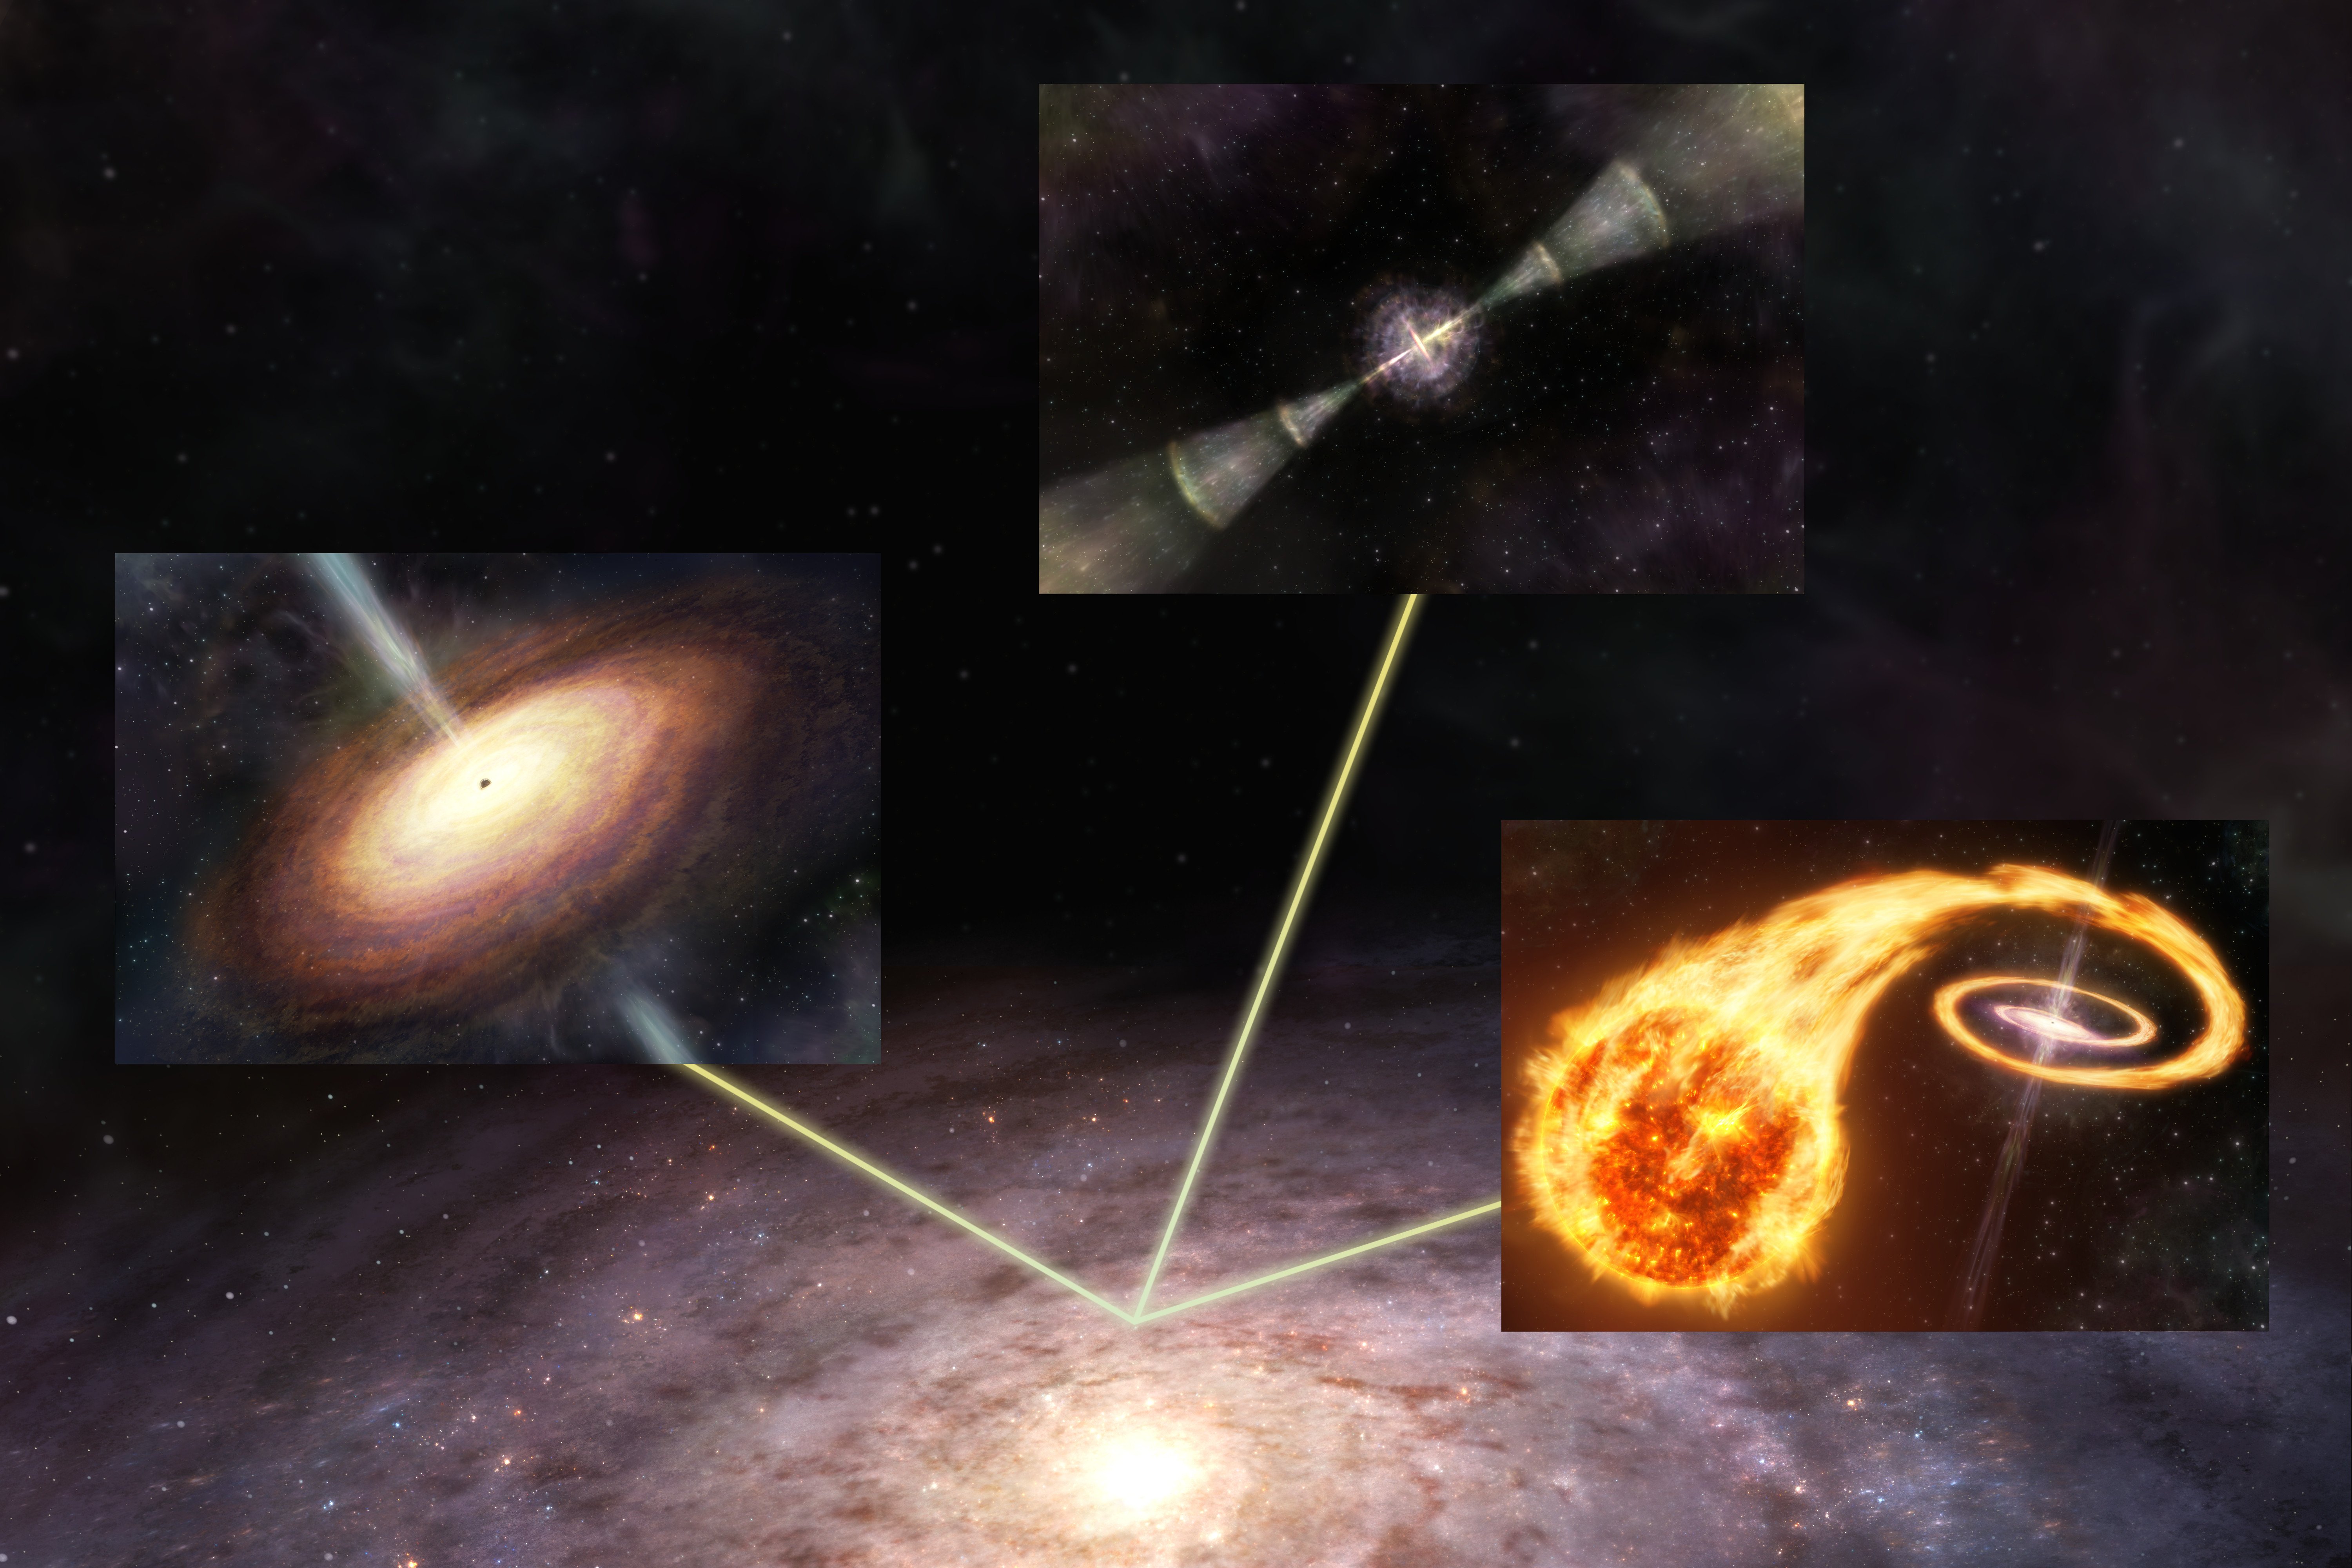 Signals from supernovae (bottom right inset), quasars (middle left inset), and gamma-ray bursts (top center inset) reach Earth in the Milky Way Galaxy (background)